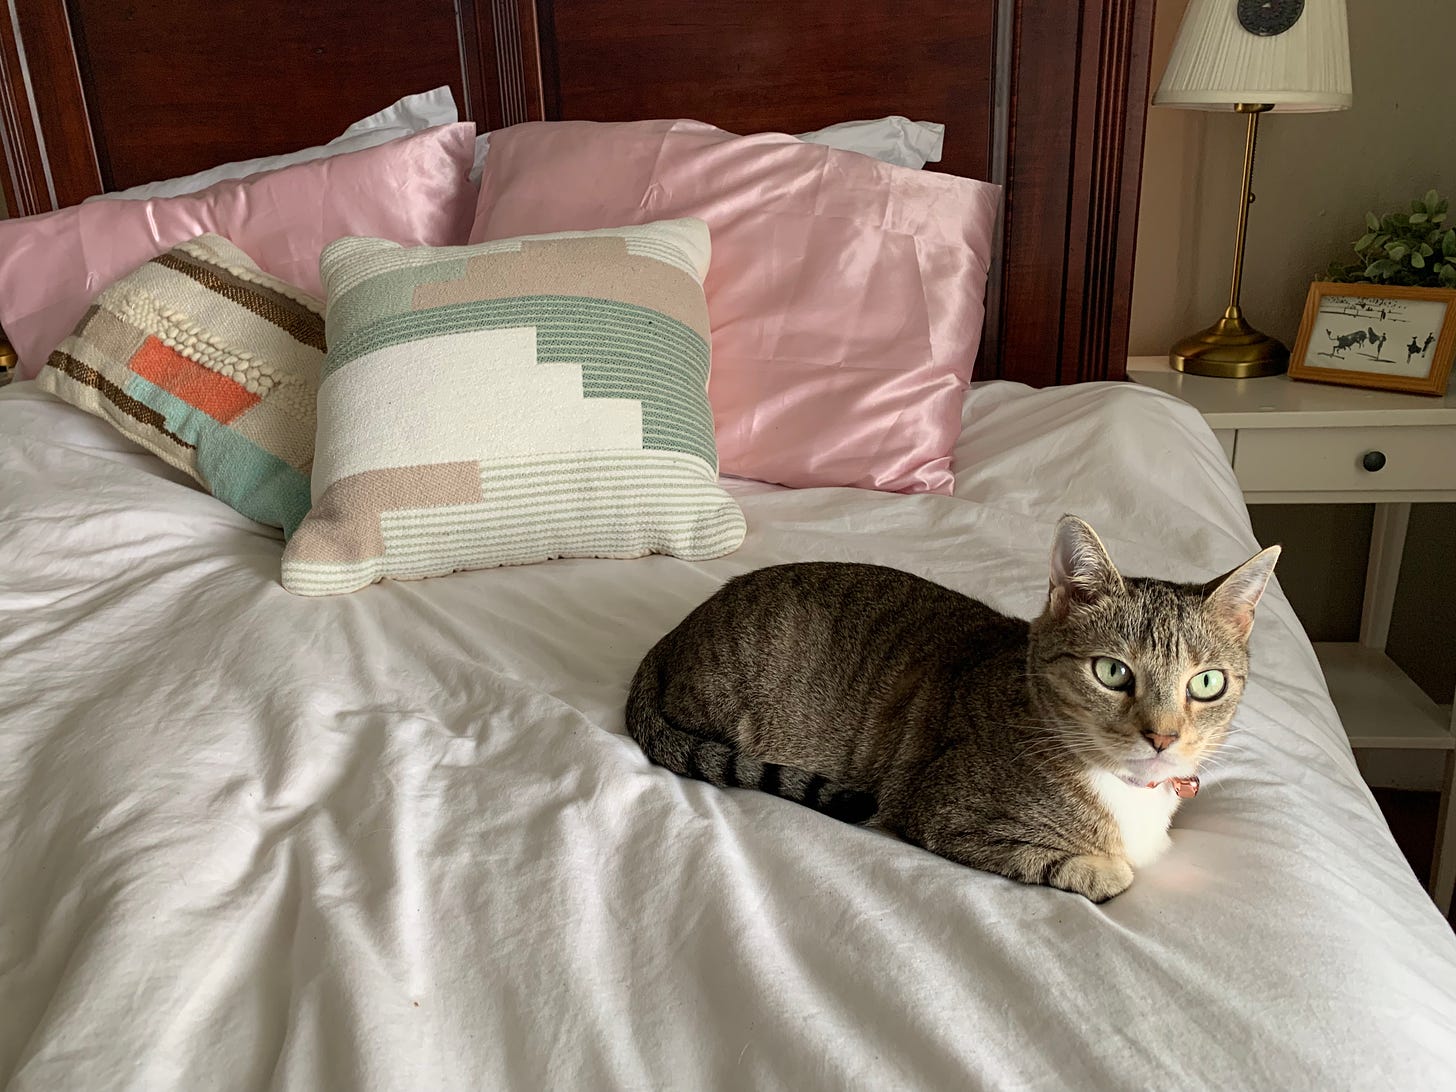 A taby cat sits on bed adorned with pink and patterned pillows, staring at the camera.